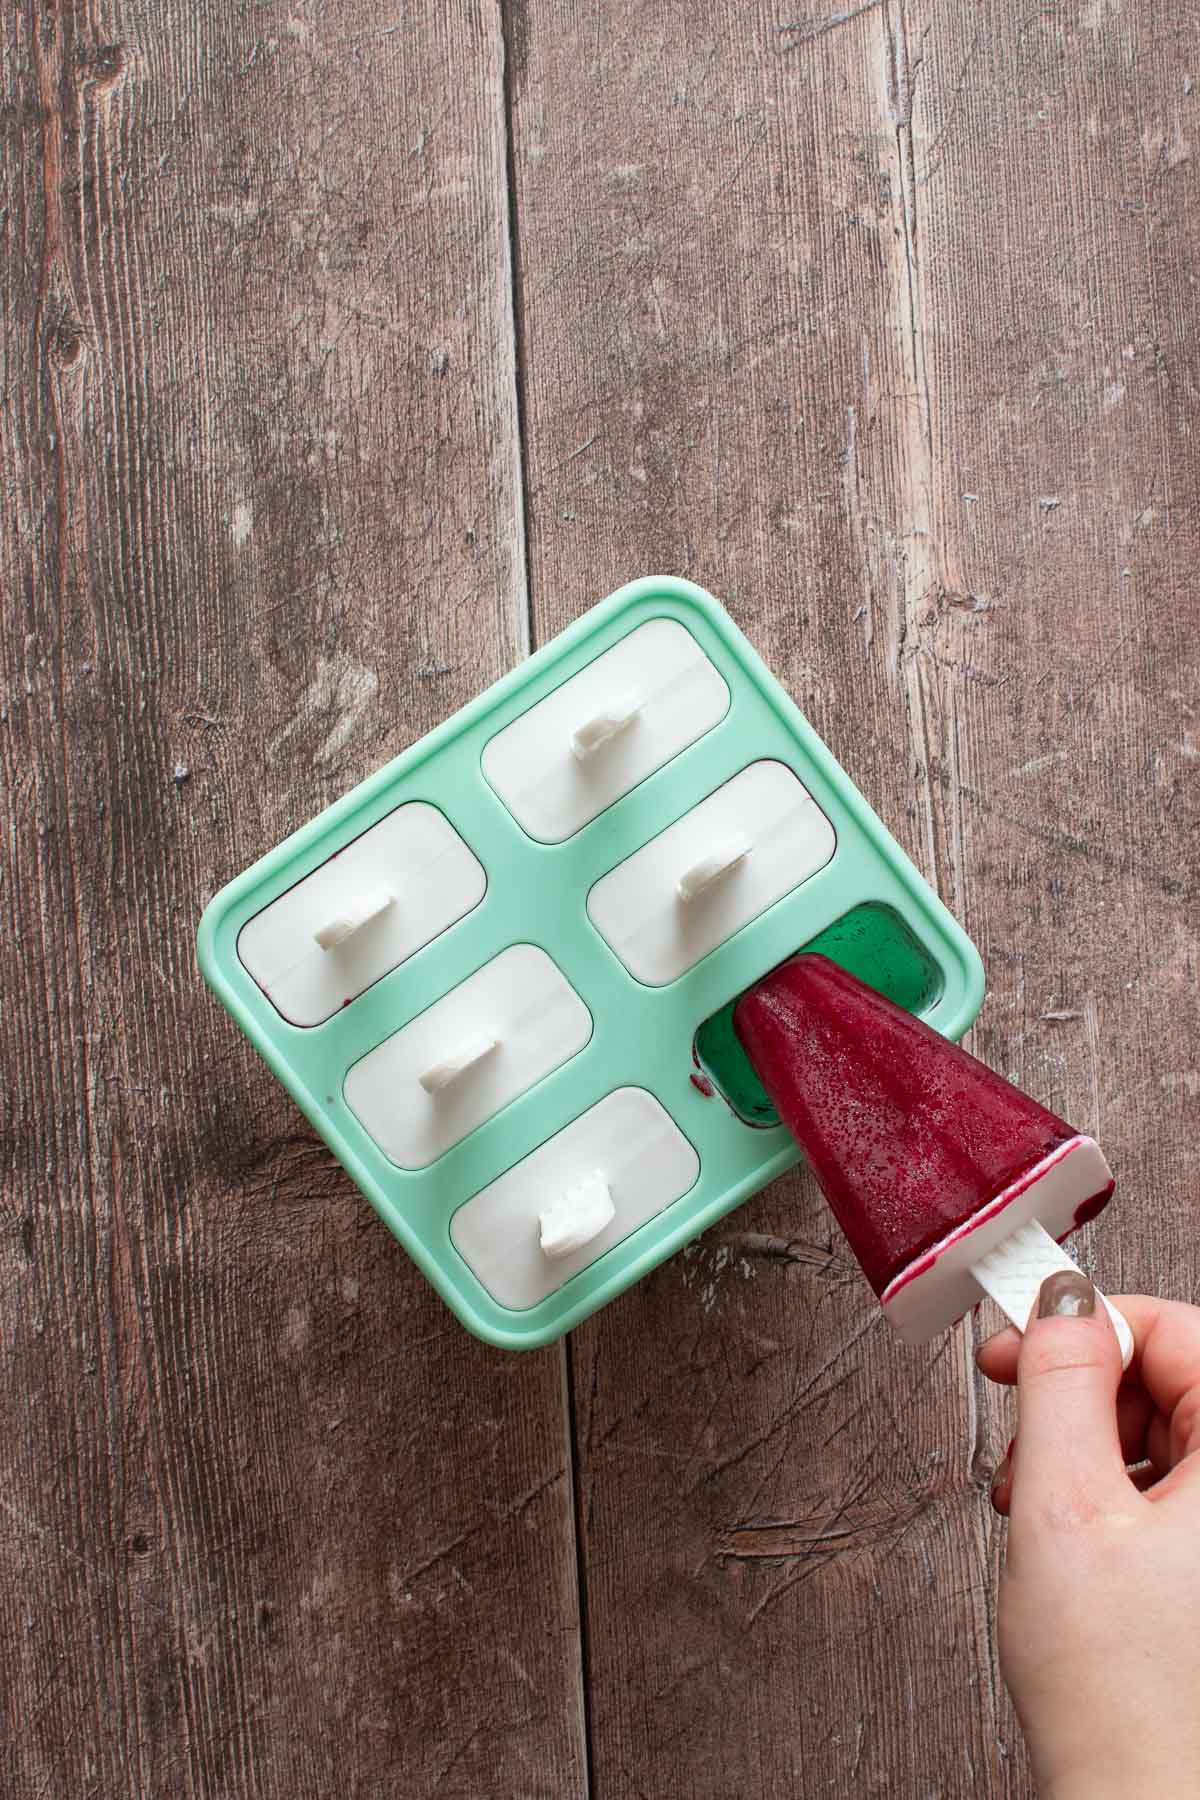 Pulling a popsicle out of molds.